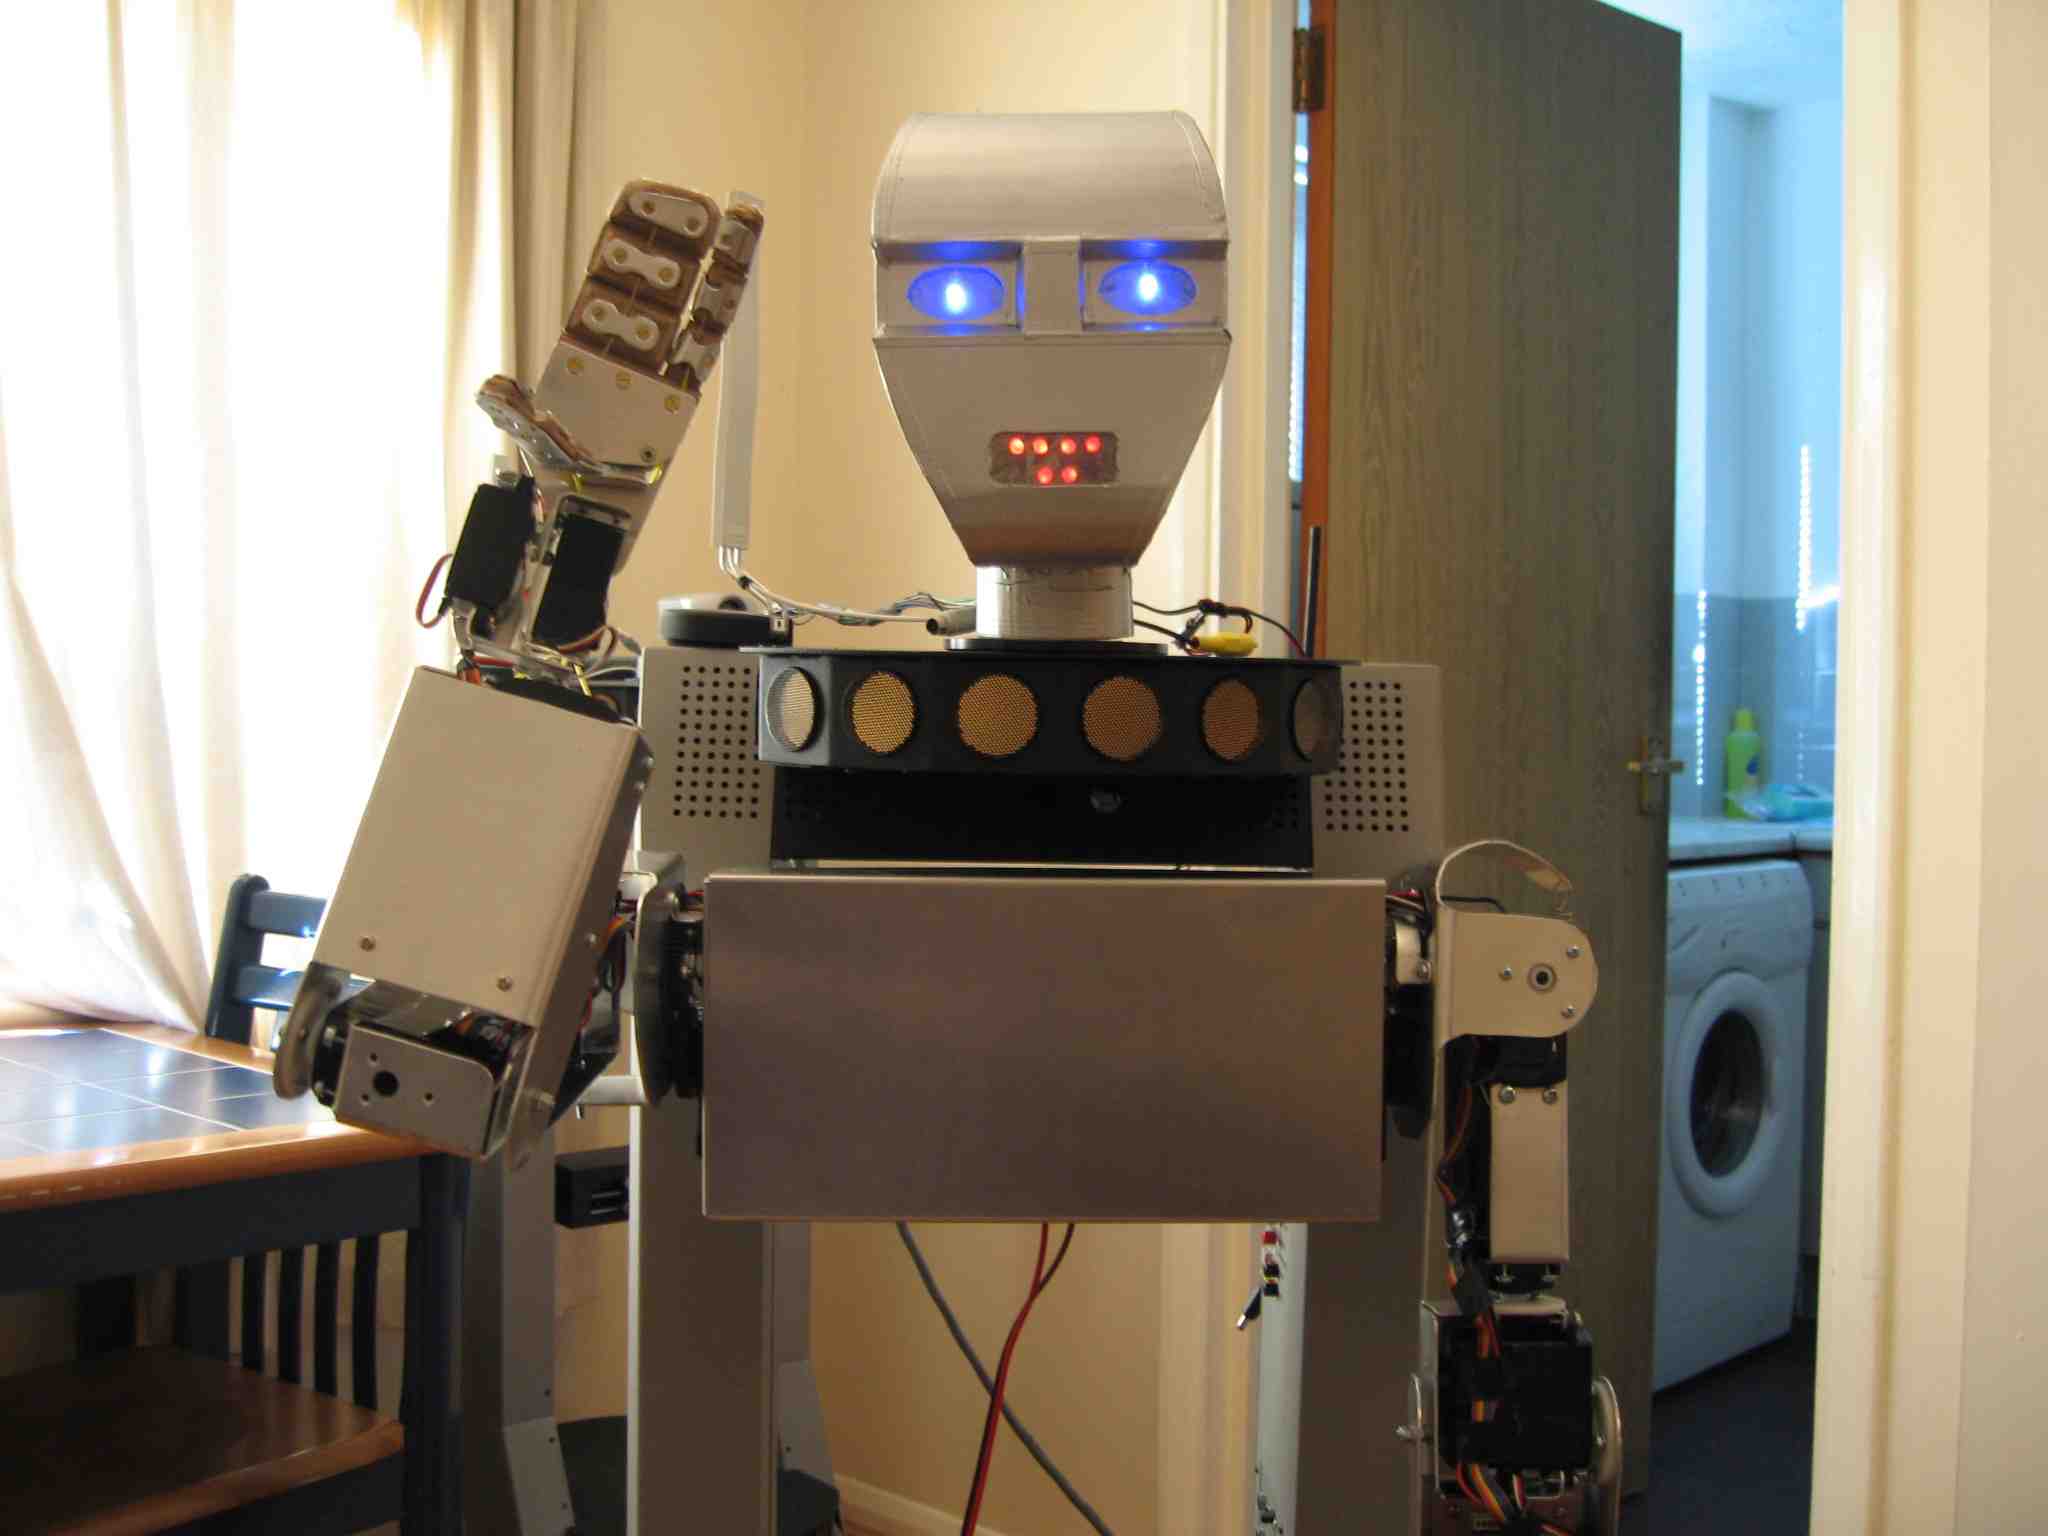 A friendly humanoid robot